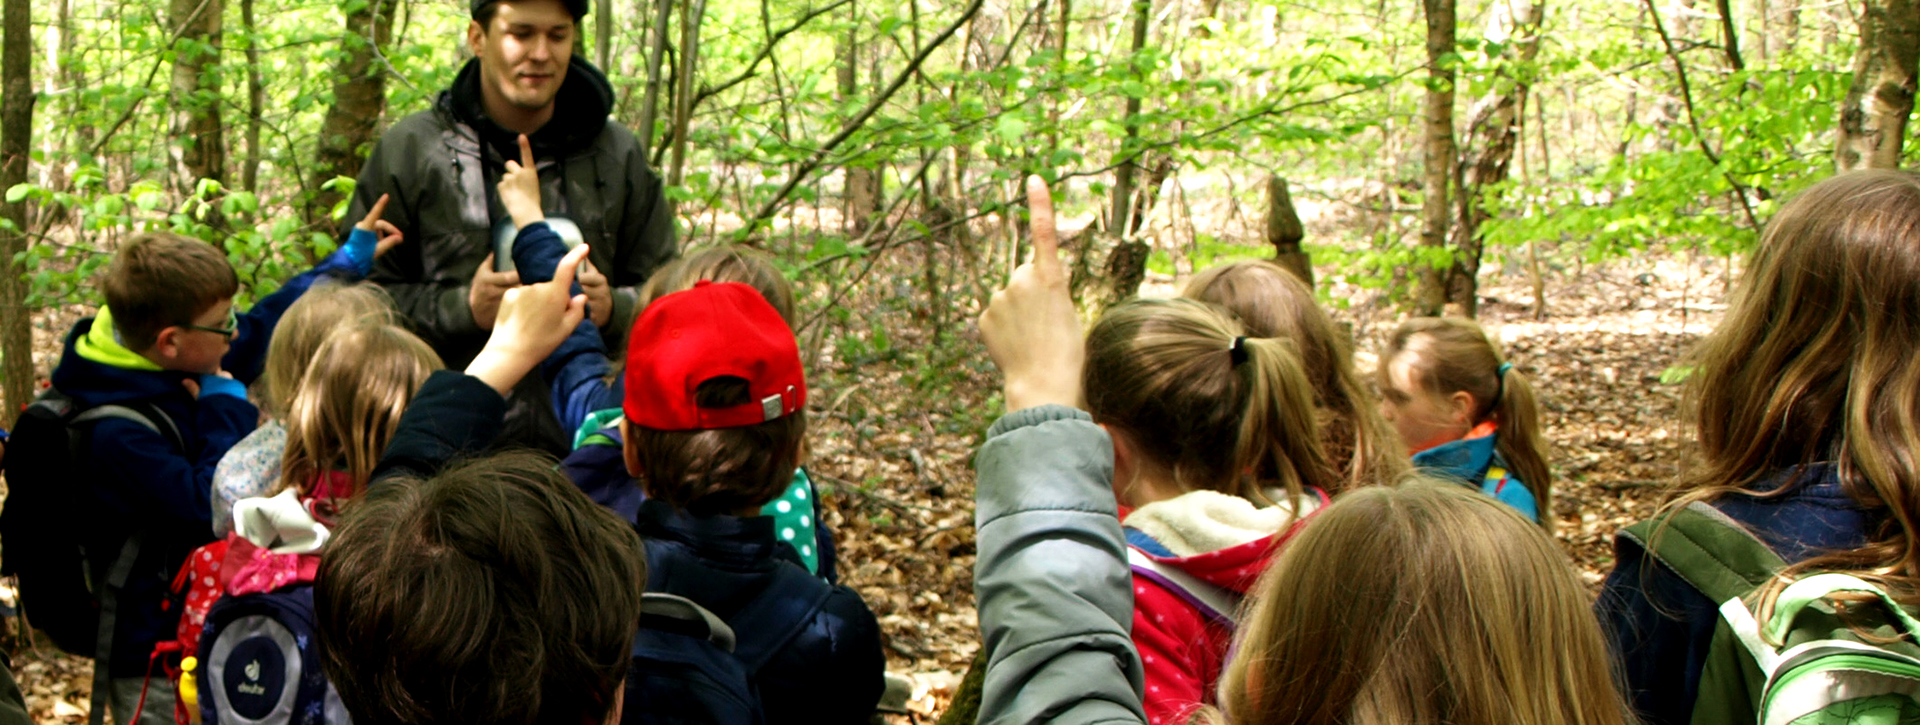 Group of students stands in the forest and listens to a man